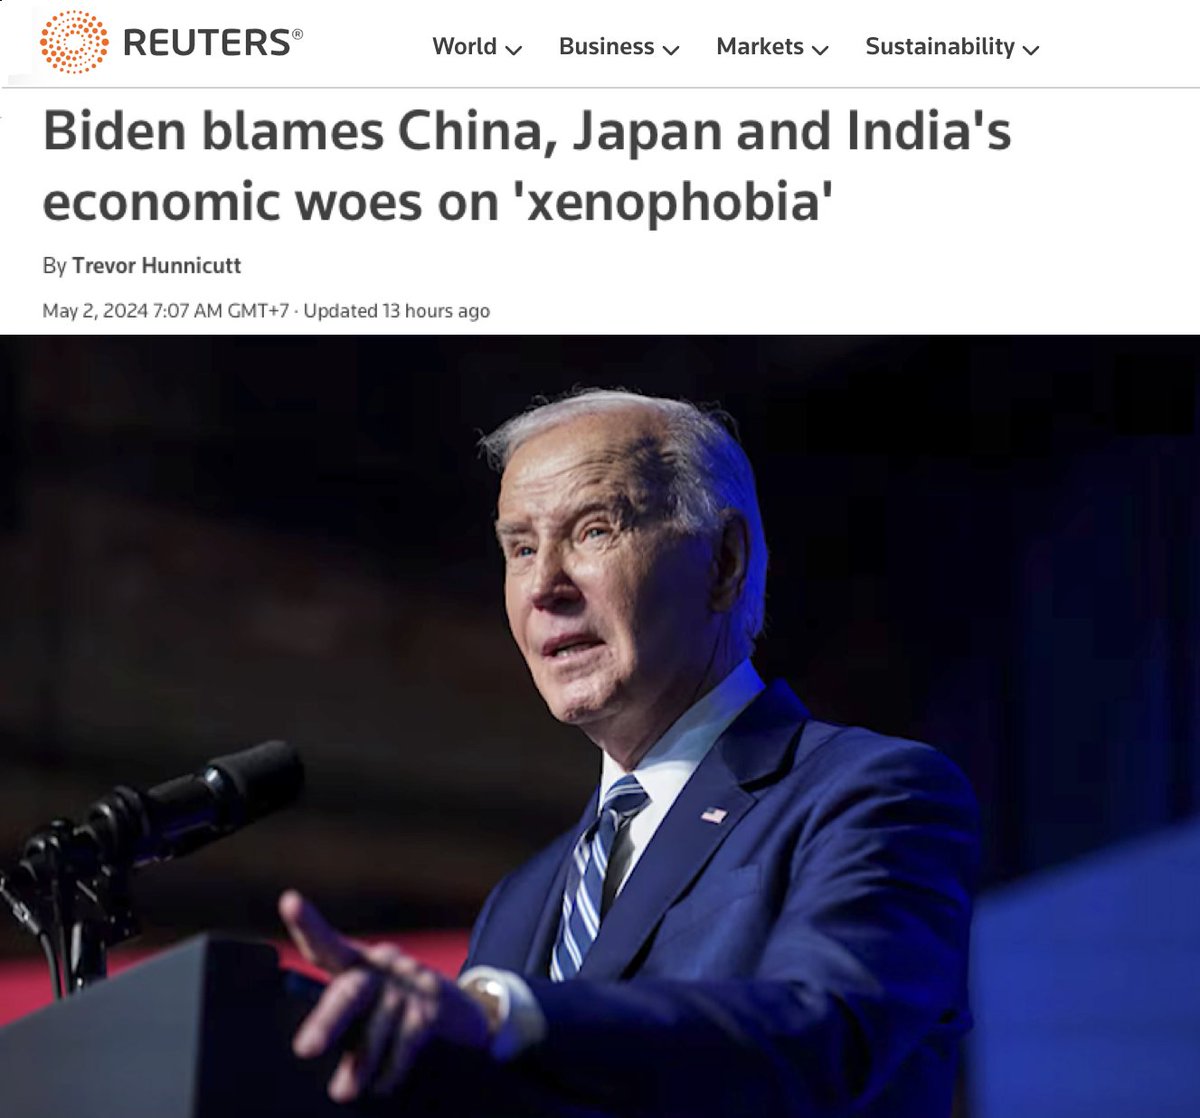 Calling India 🇮🇳 a ‘xenophobic’ nation by JOKER Biden @POTUS is actually a direct insult to crores of illegal immigrants from Bangladesh 🇧🇩, Nepal 🇳🇵, Bhutan 🇧🇹 and above all Myanmar 🇲🇲, who entered in and are still entering in India 🇮🇳 in thousands per day, making it a shithole.